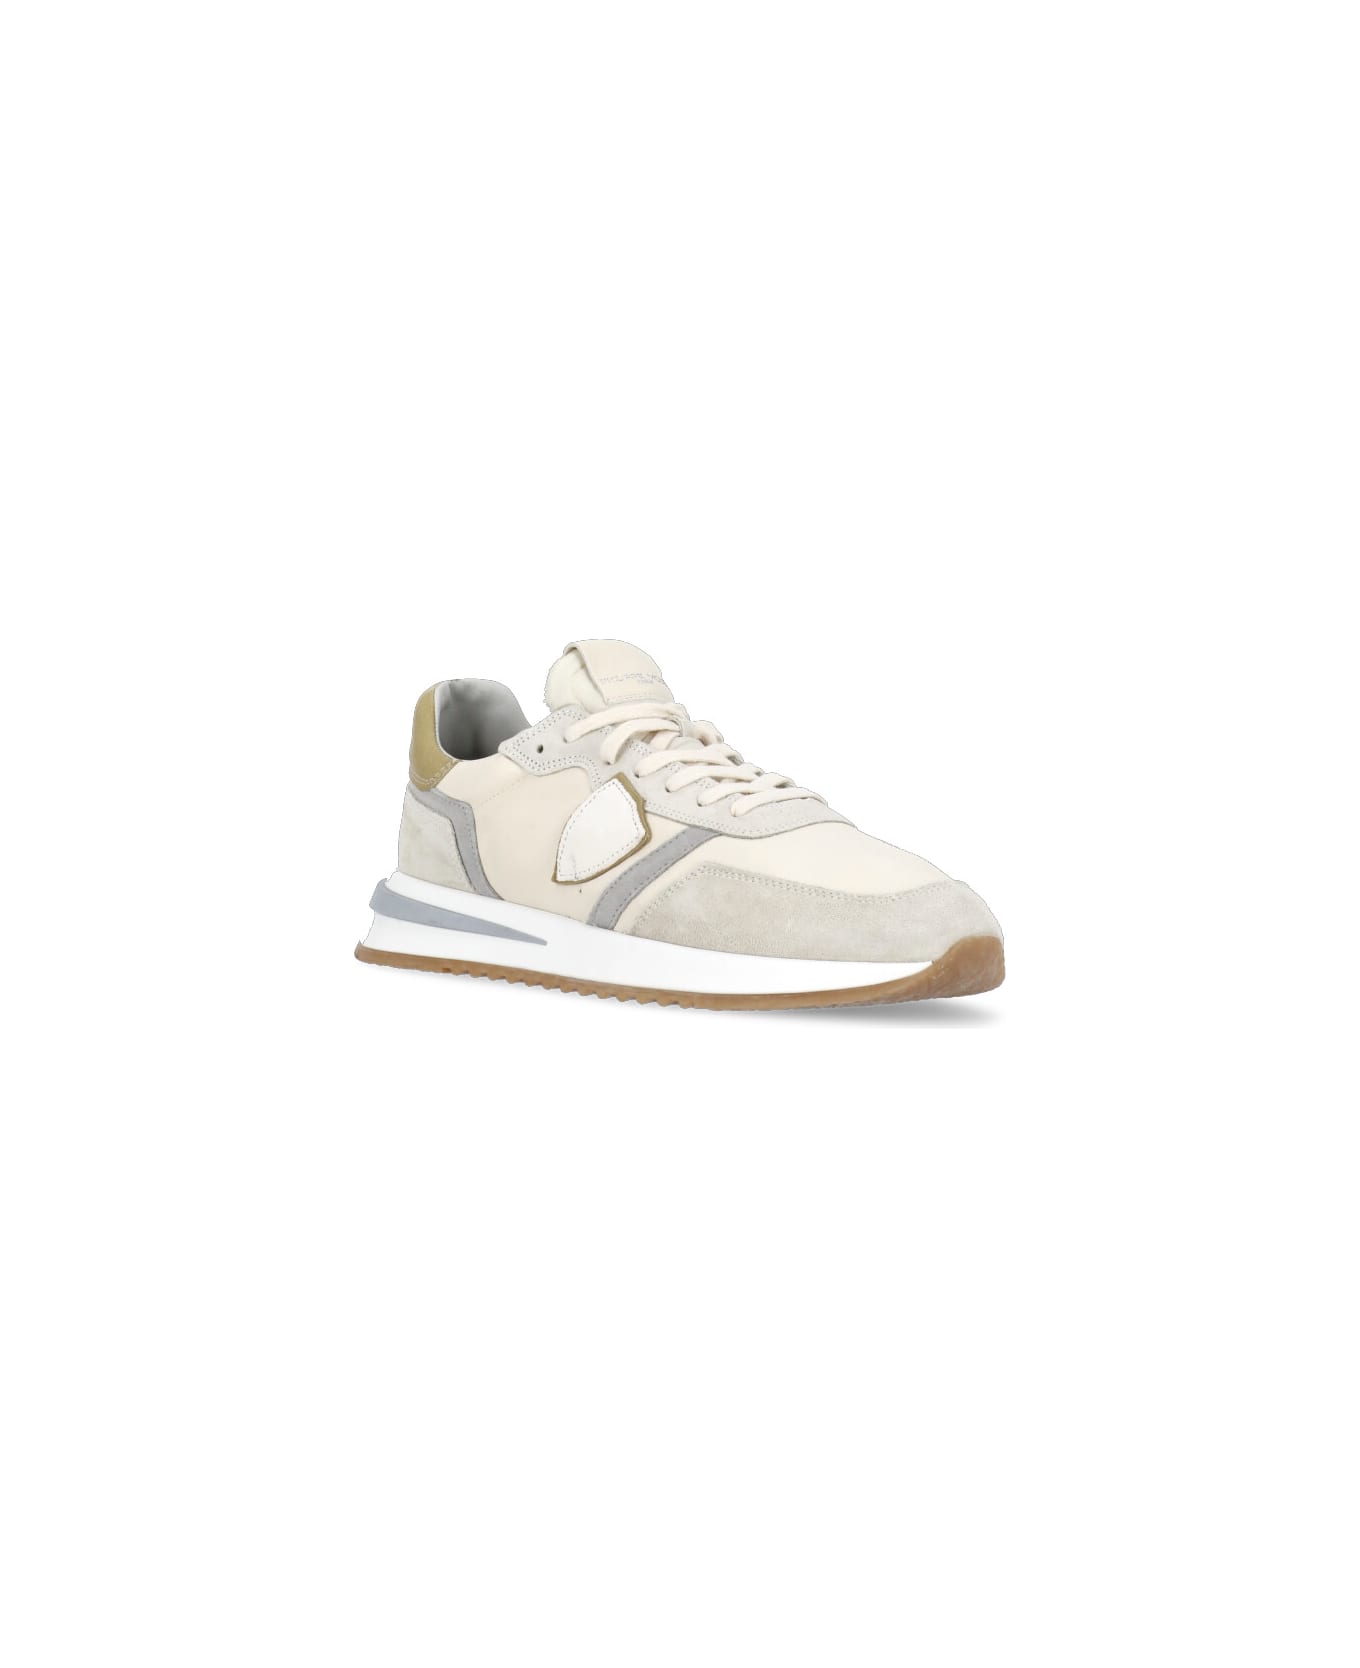 Philippe Model Running Tropez 2.1 Sneakers - Ivory